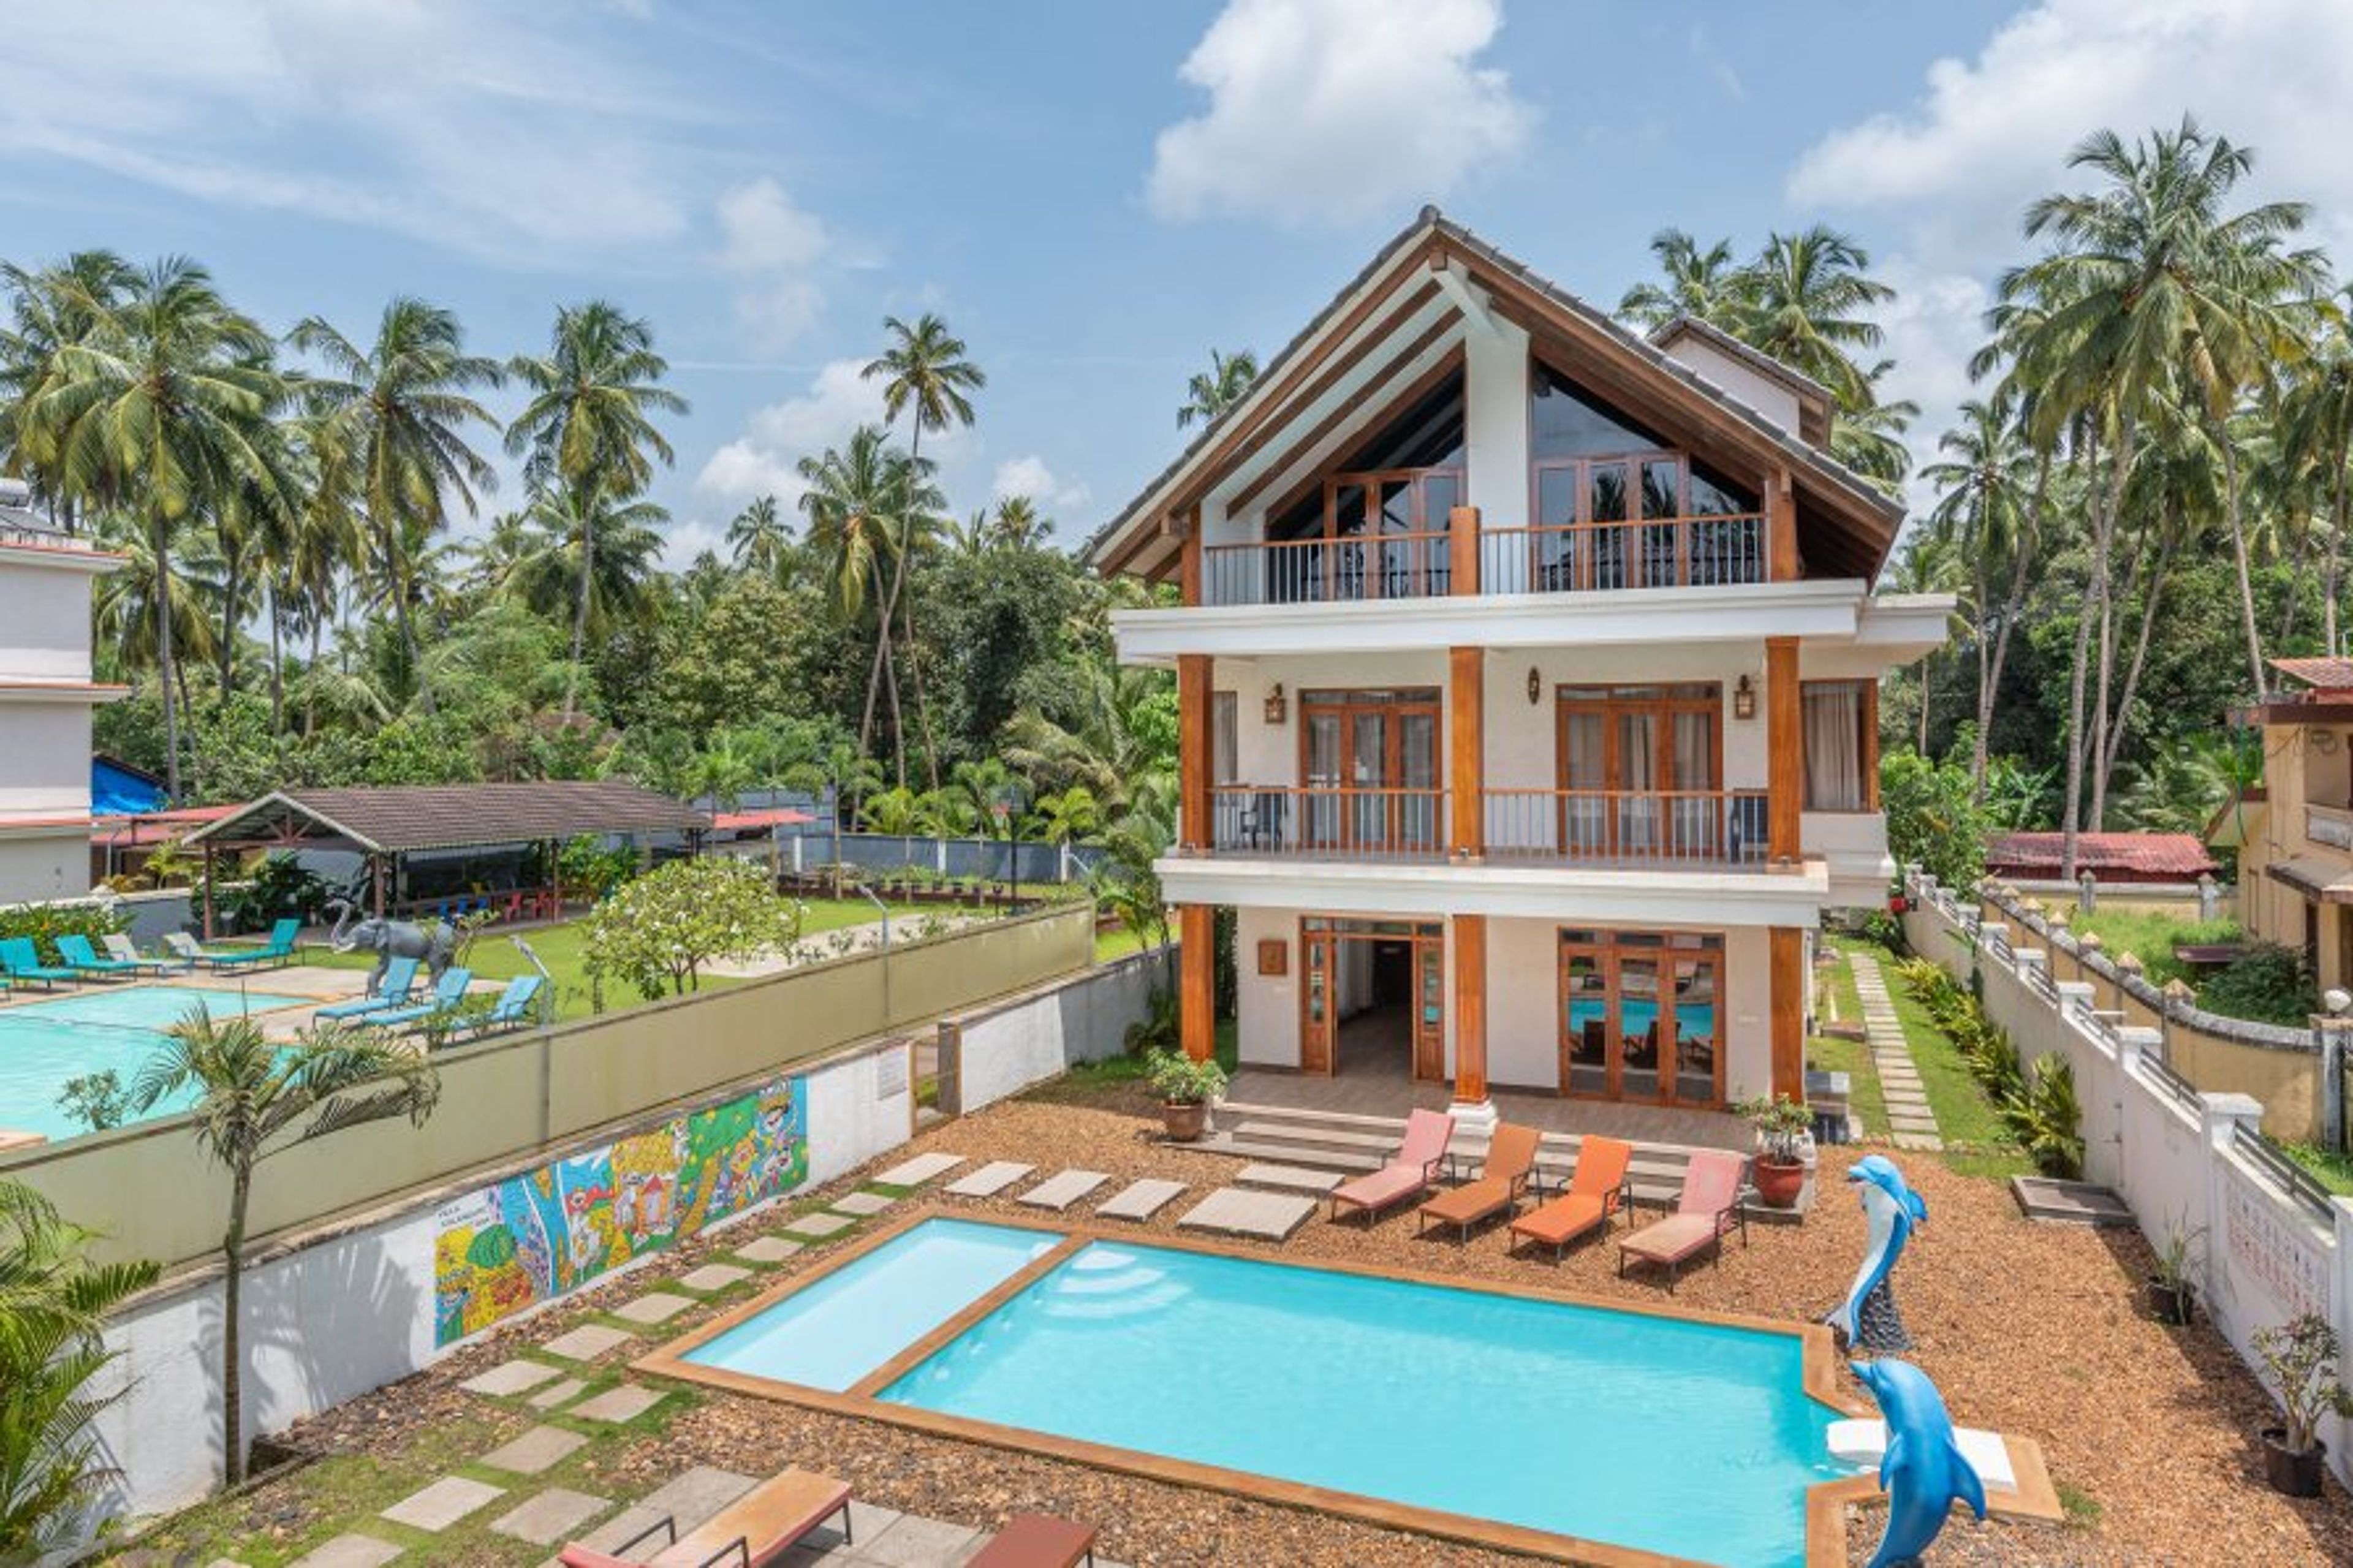 Balinese style newly built 4BHK villa available for rent